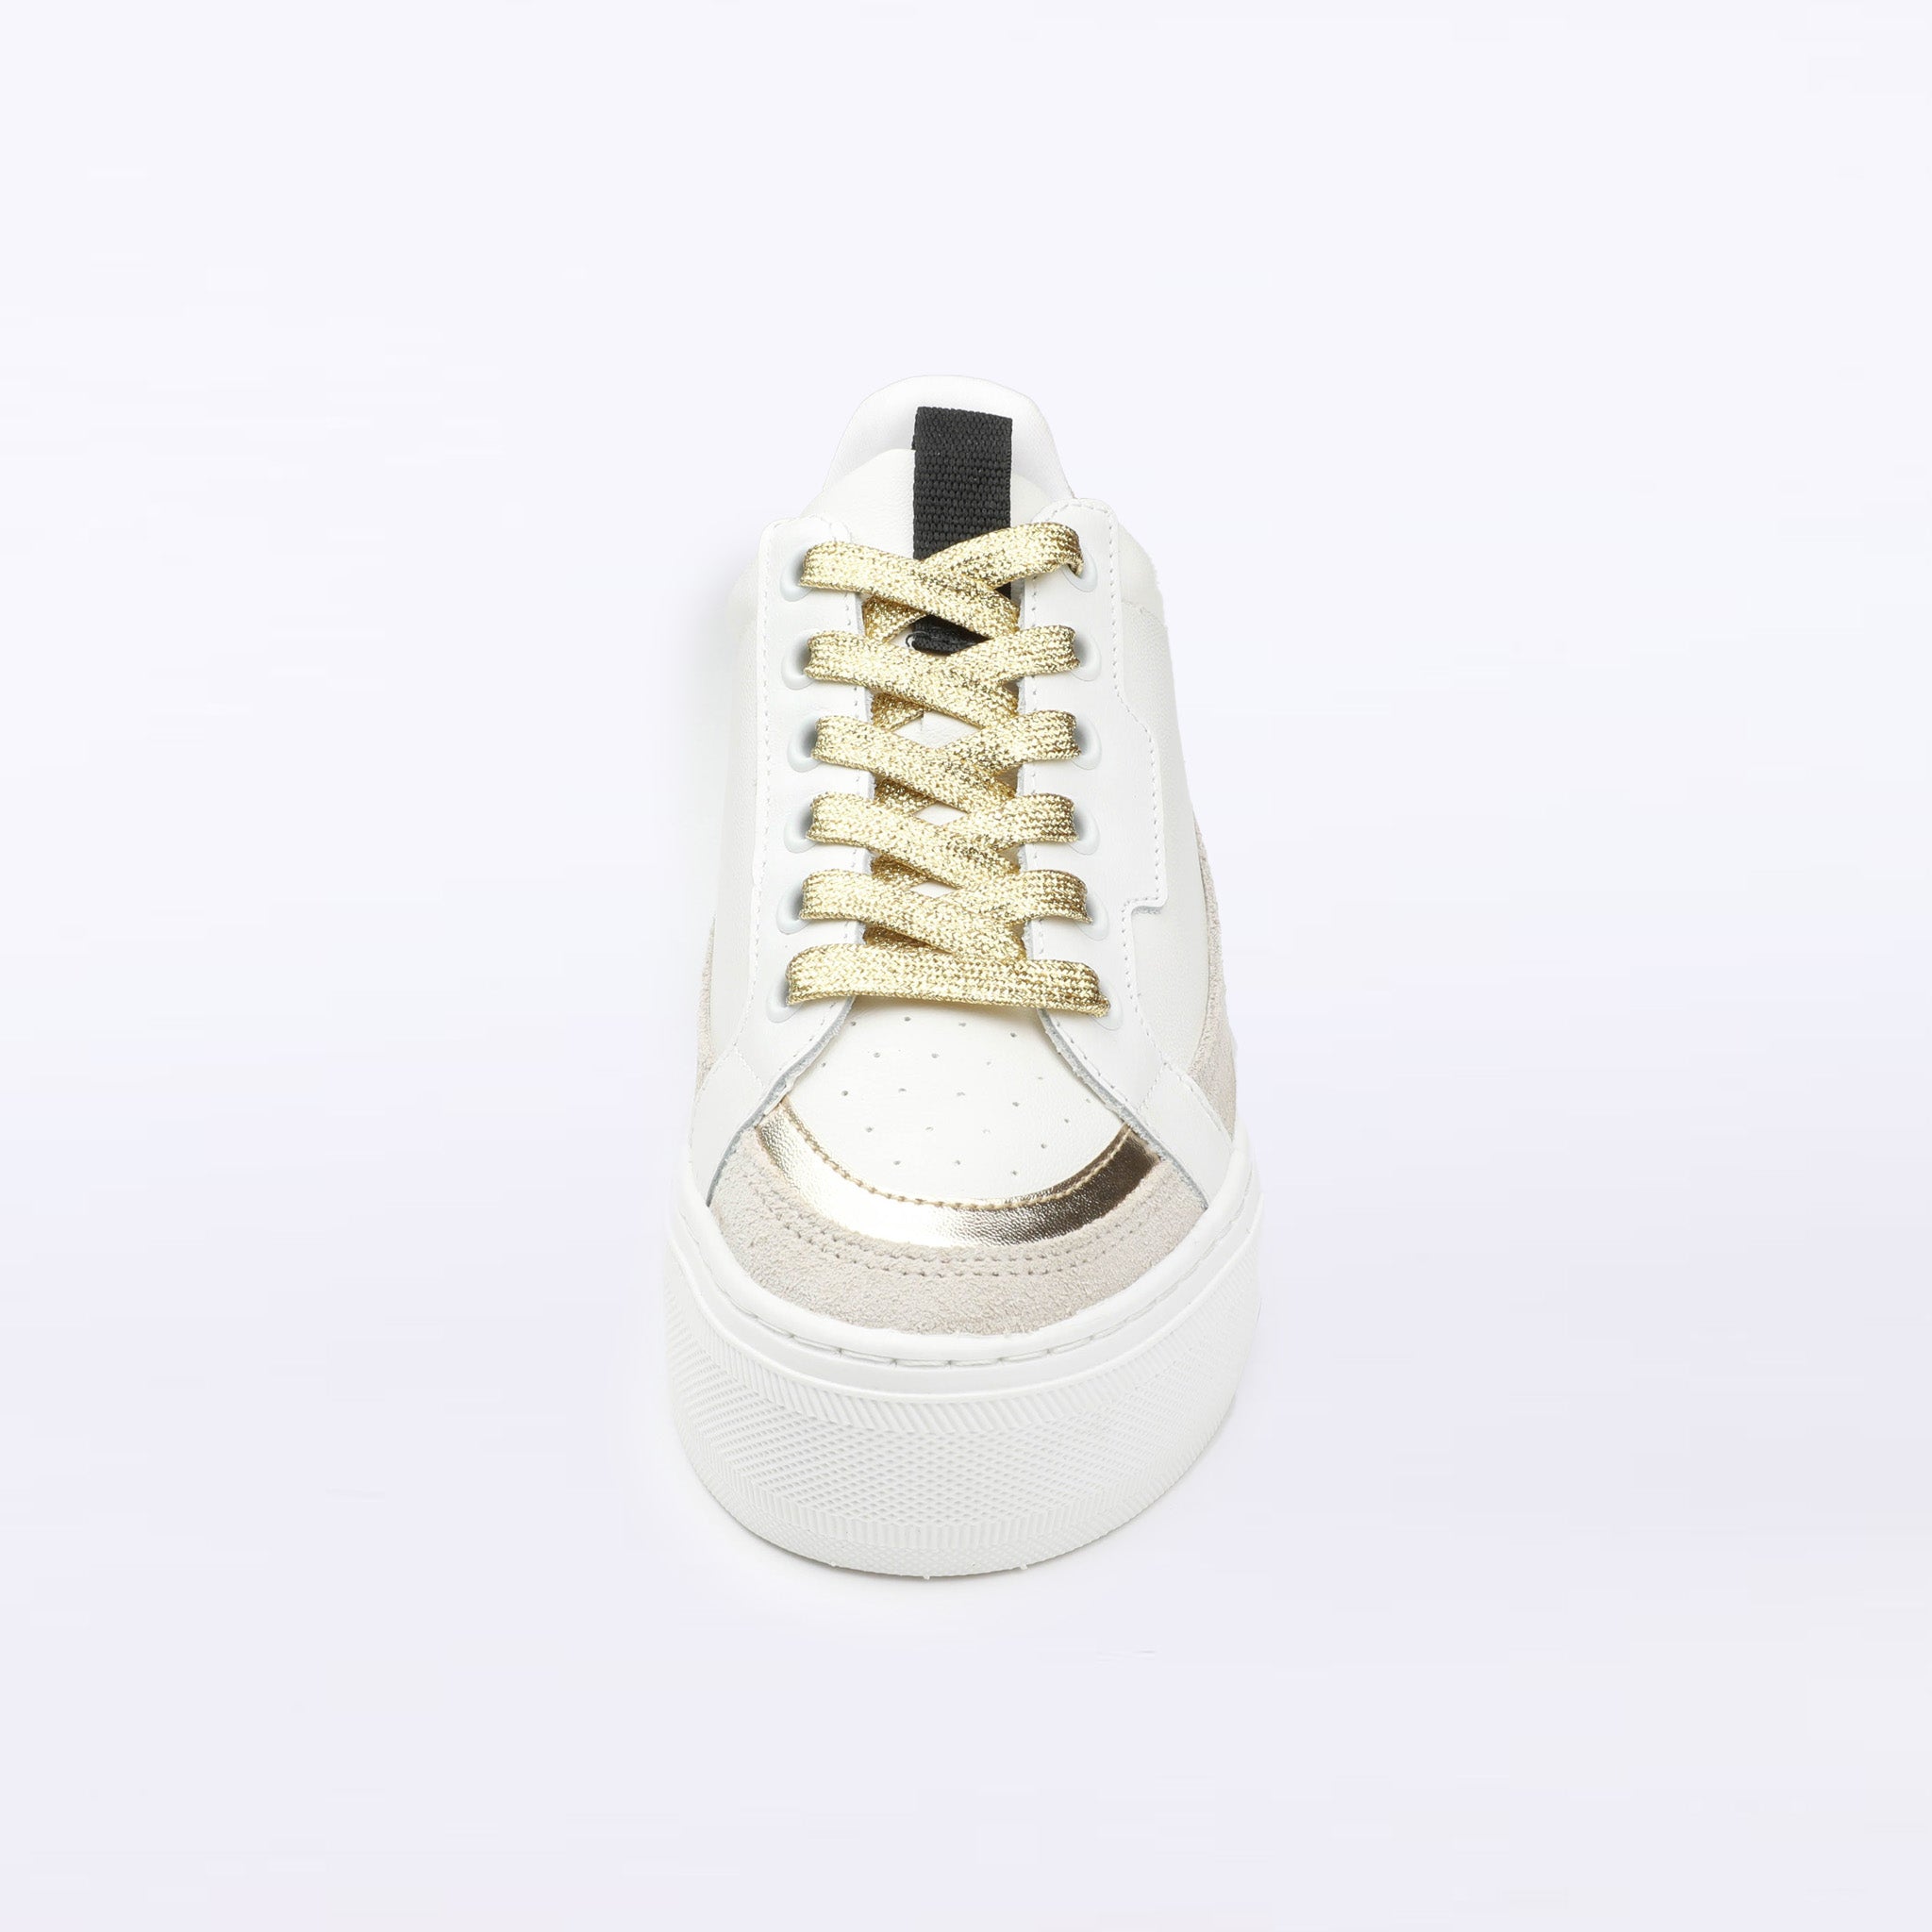 WINNING - White, Black, Gold, and Tan Sneaker - WITH GOLD LACES!